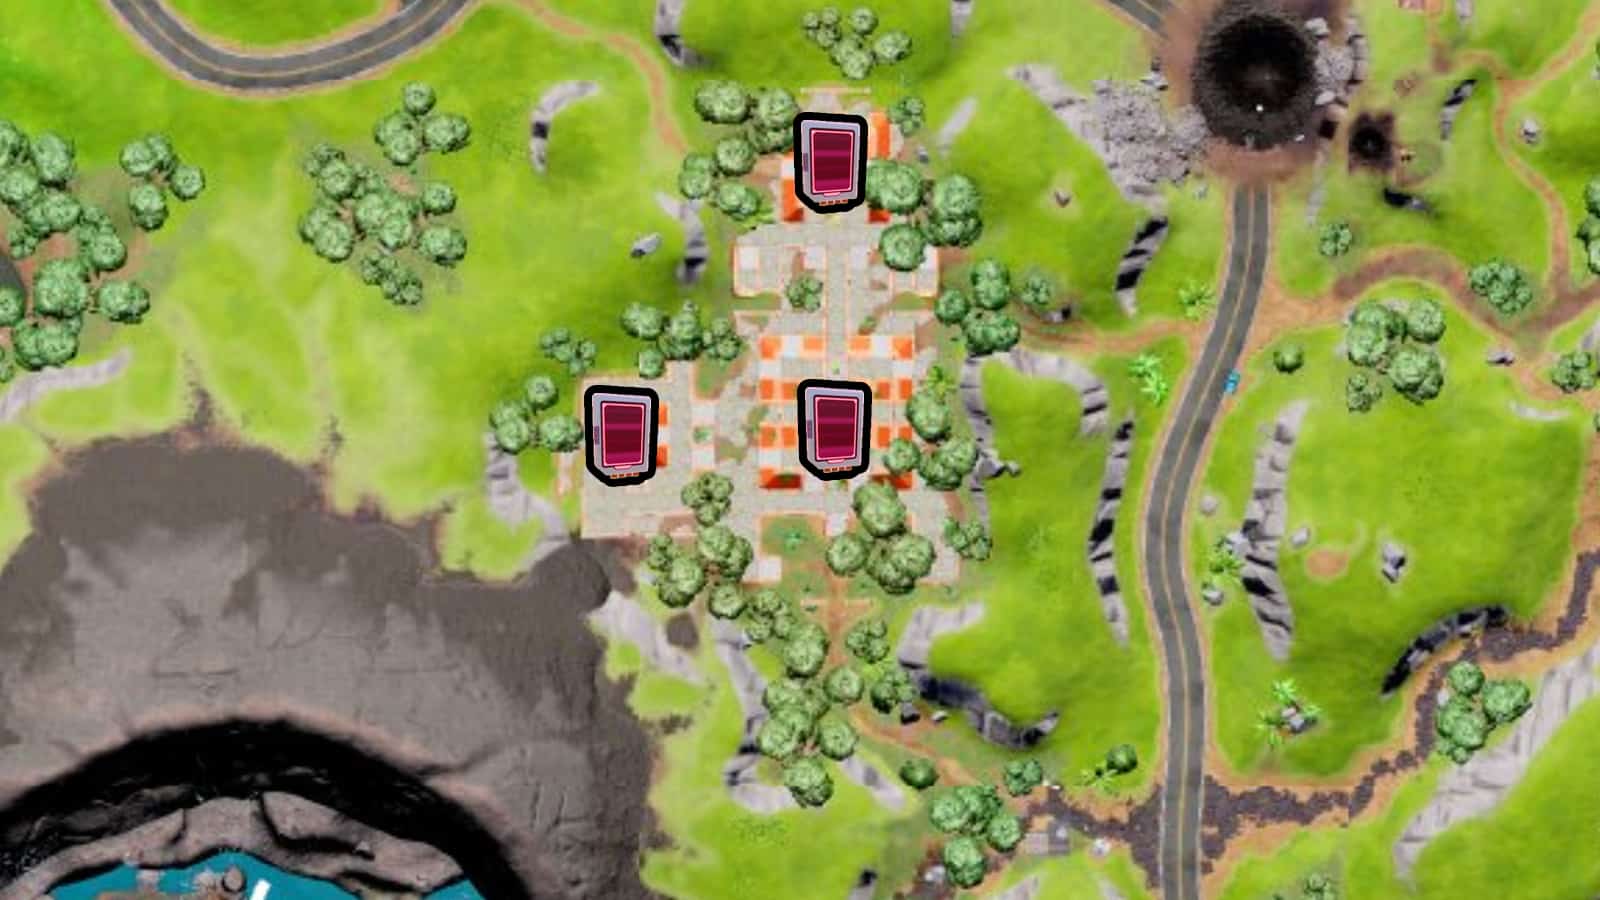 Omni Chip locations at The Temple